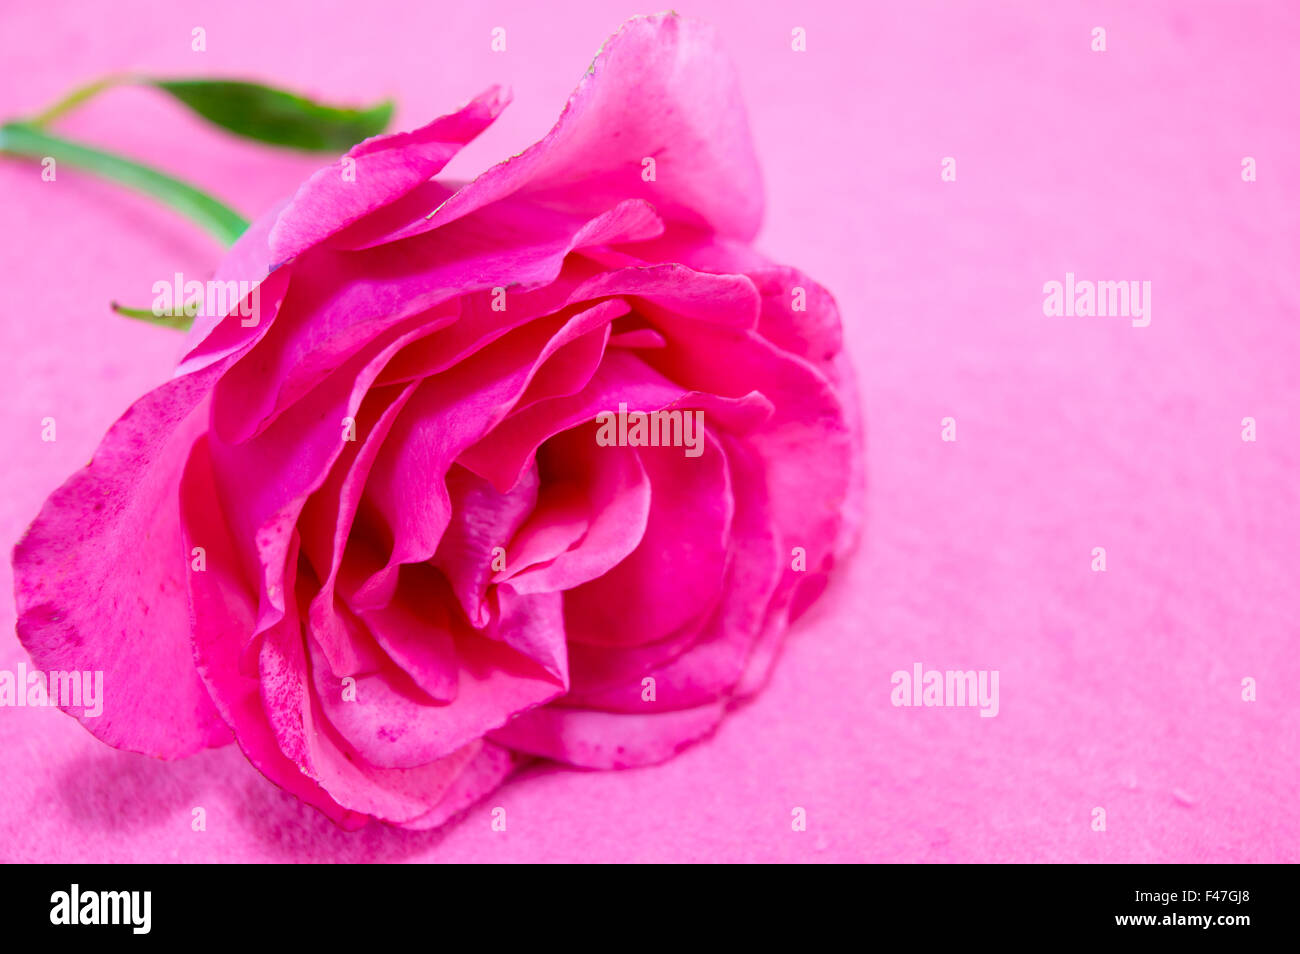 Romantic pink rose on matching pink backgound Stock Photo